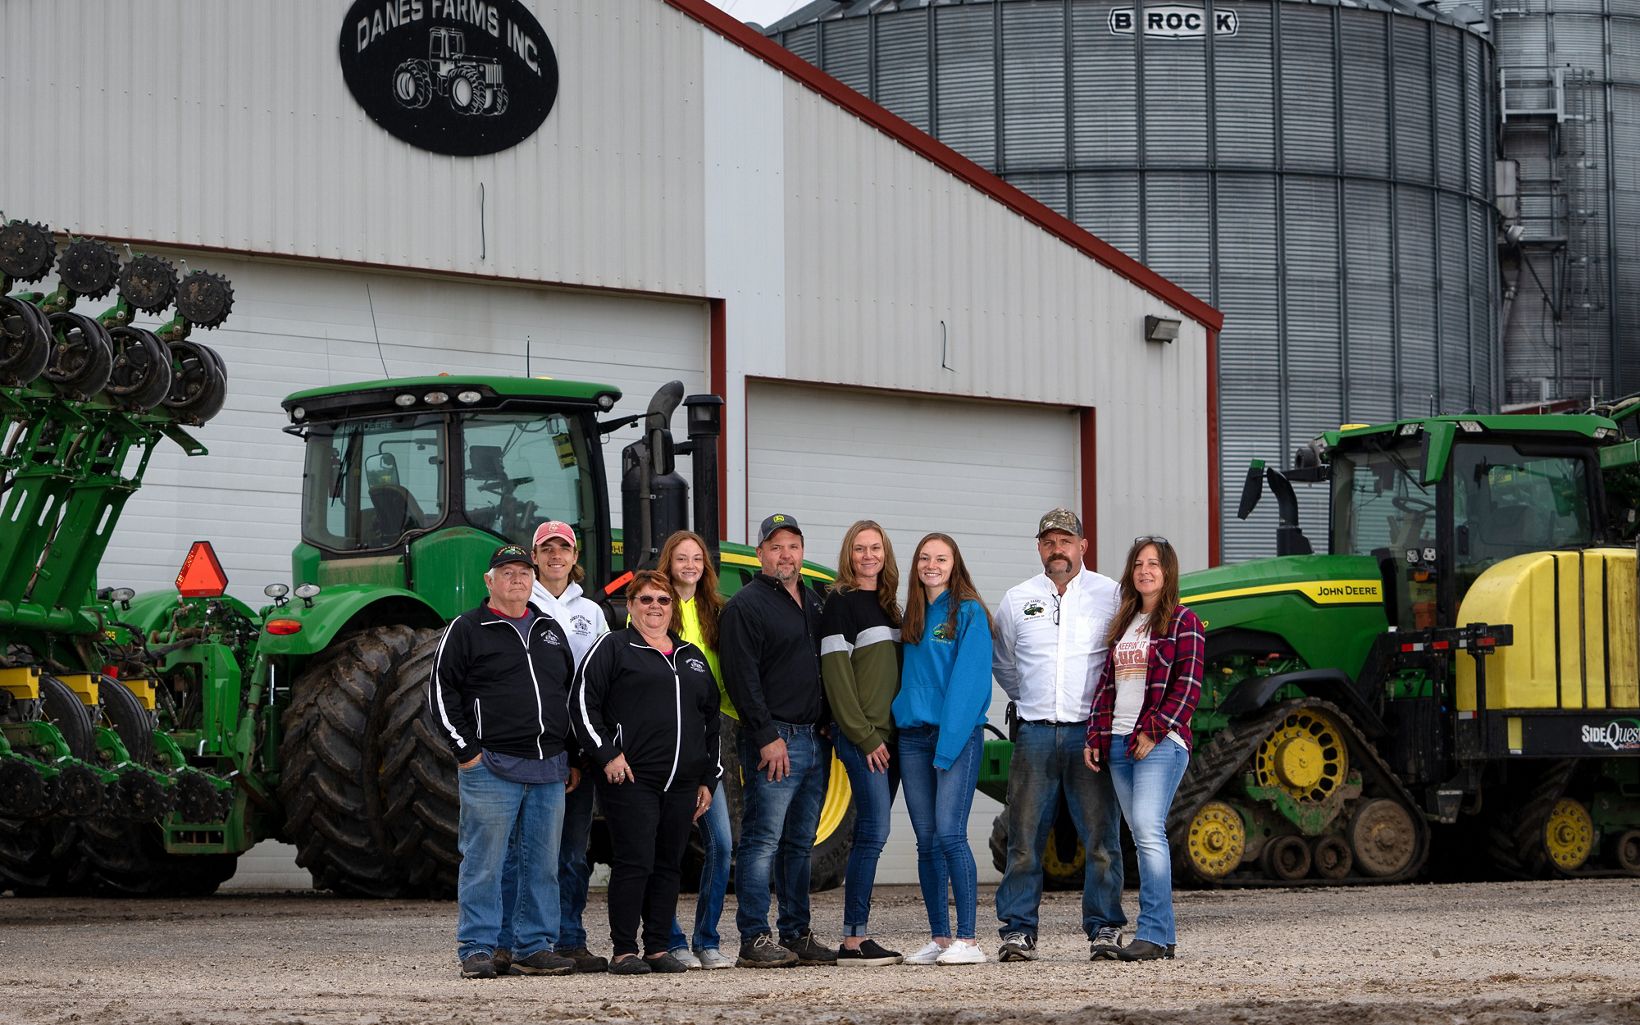 Nine members of the Danes family stand and pose in front of green tractors and metal buildings of Danes Farm.